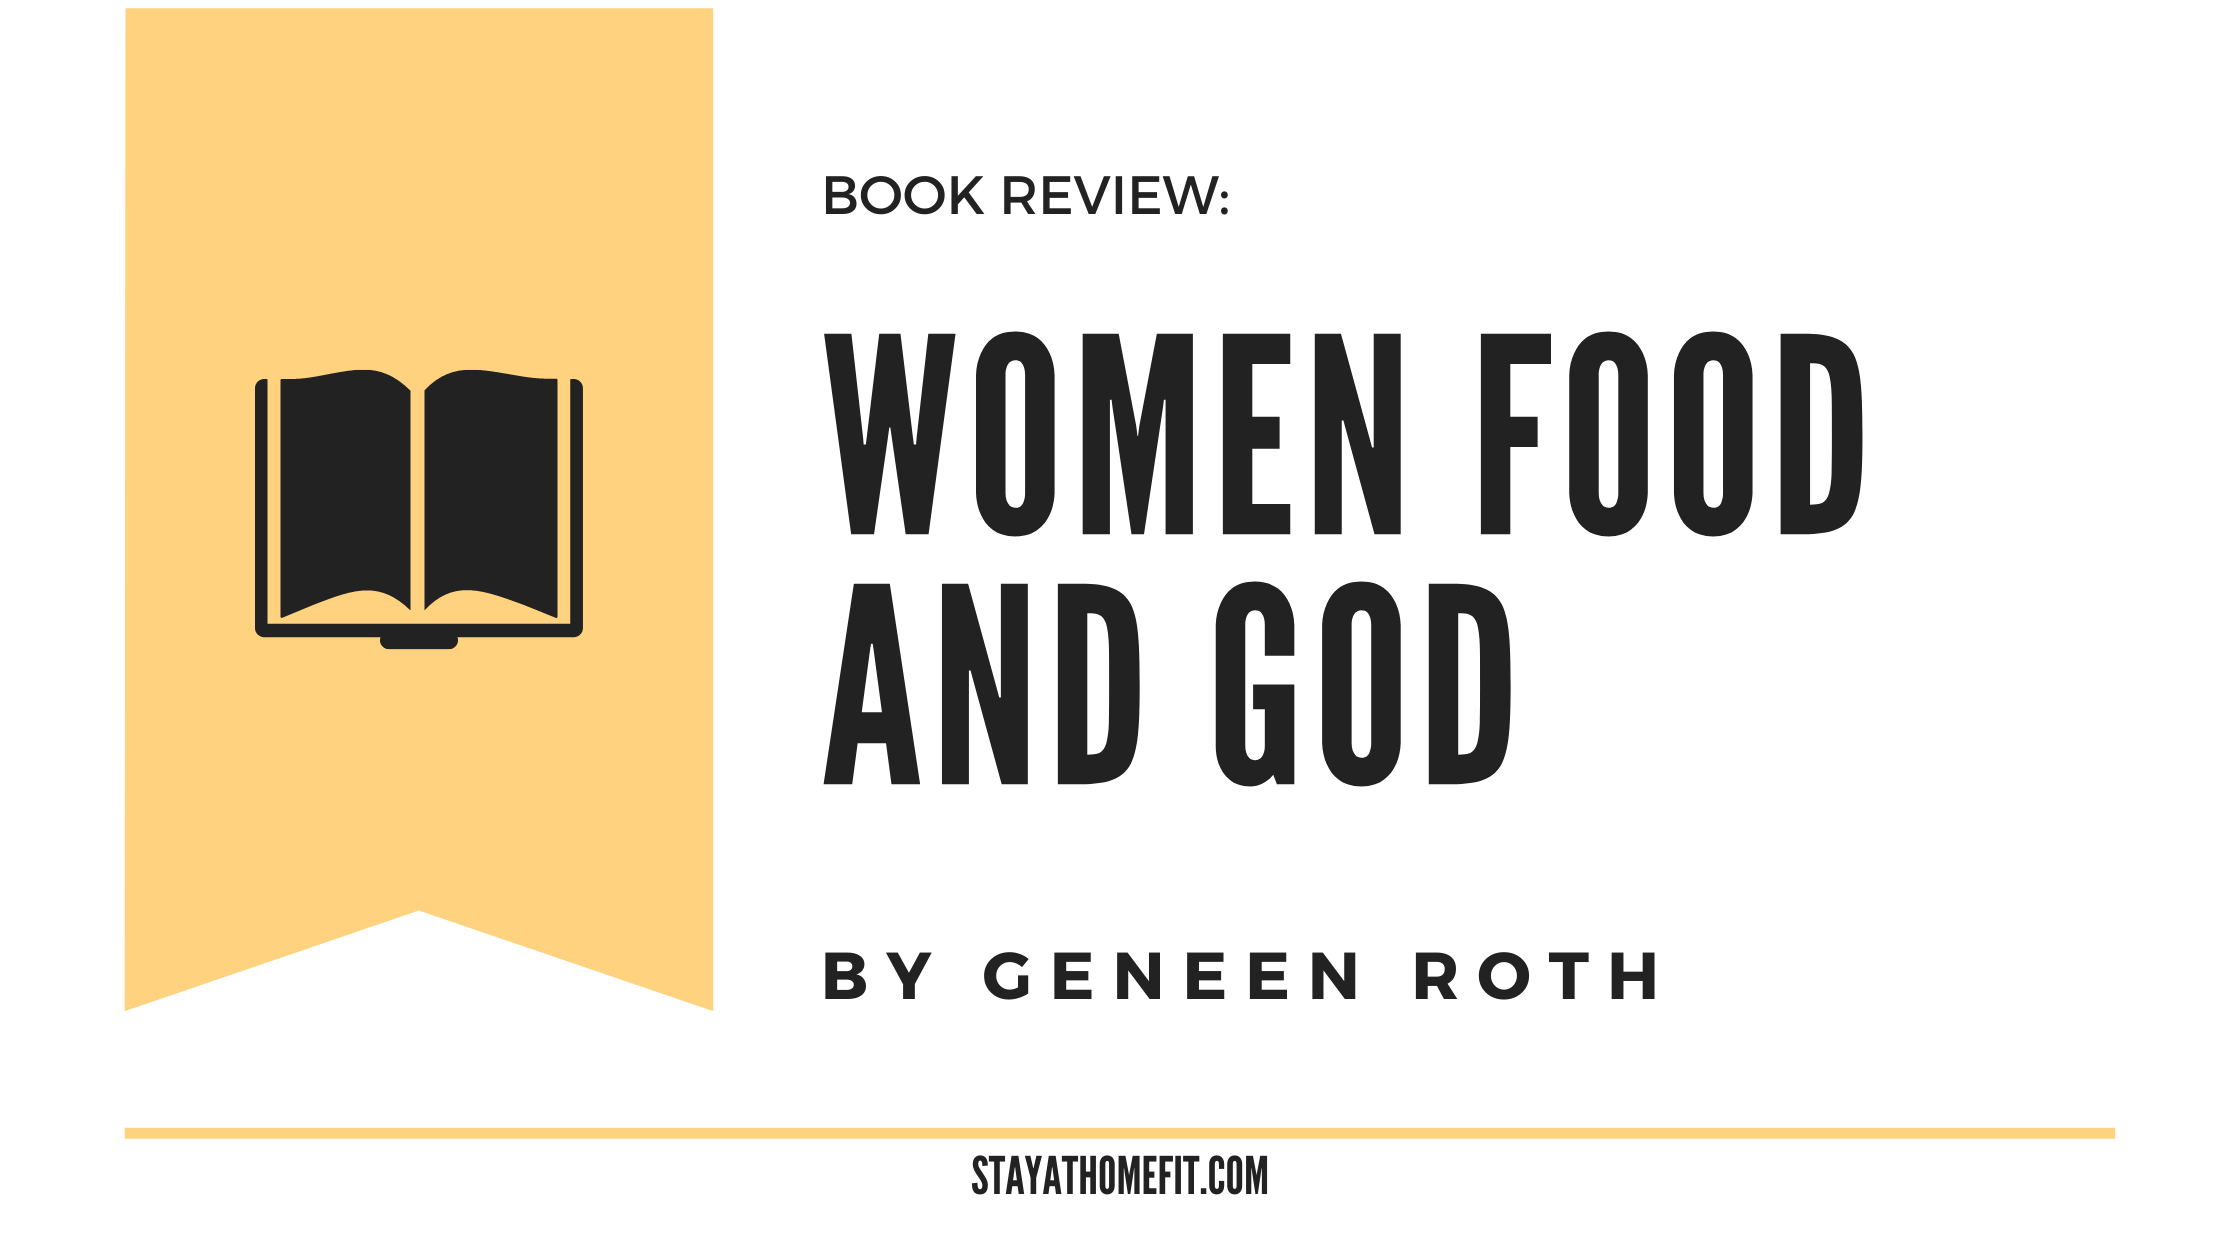 Blog Title: Book Review of Women Food and God by Geneen Roth